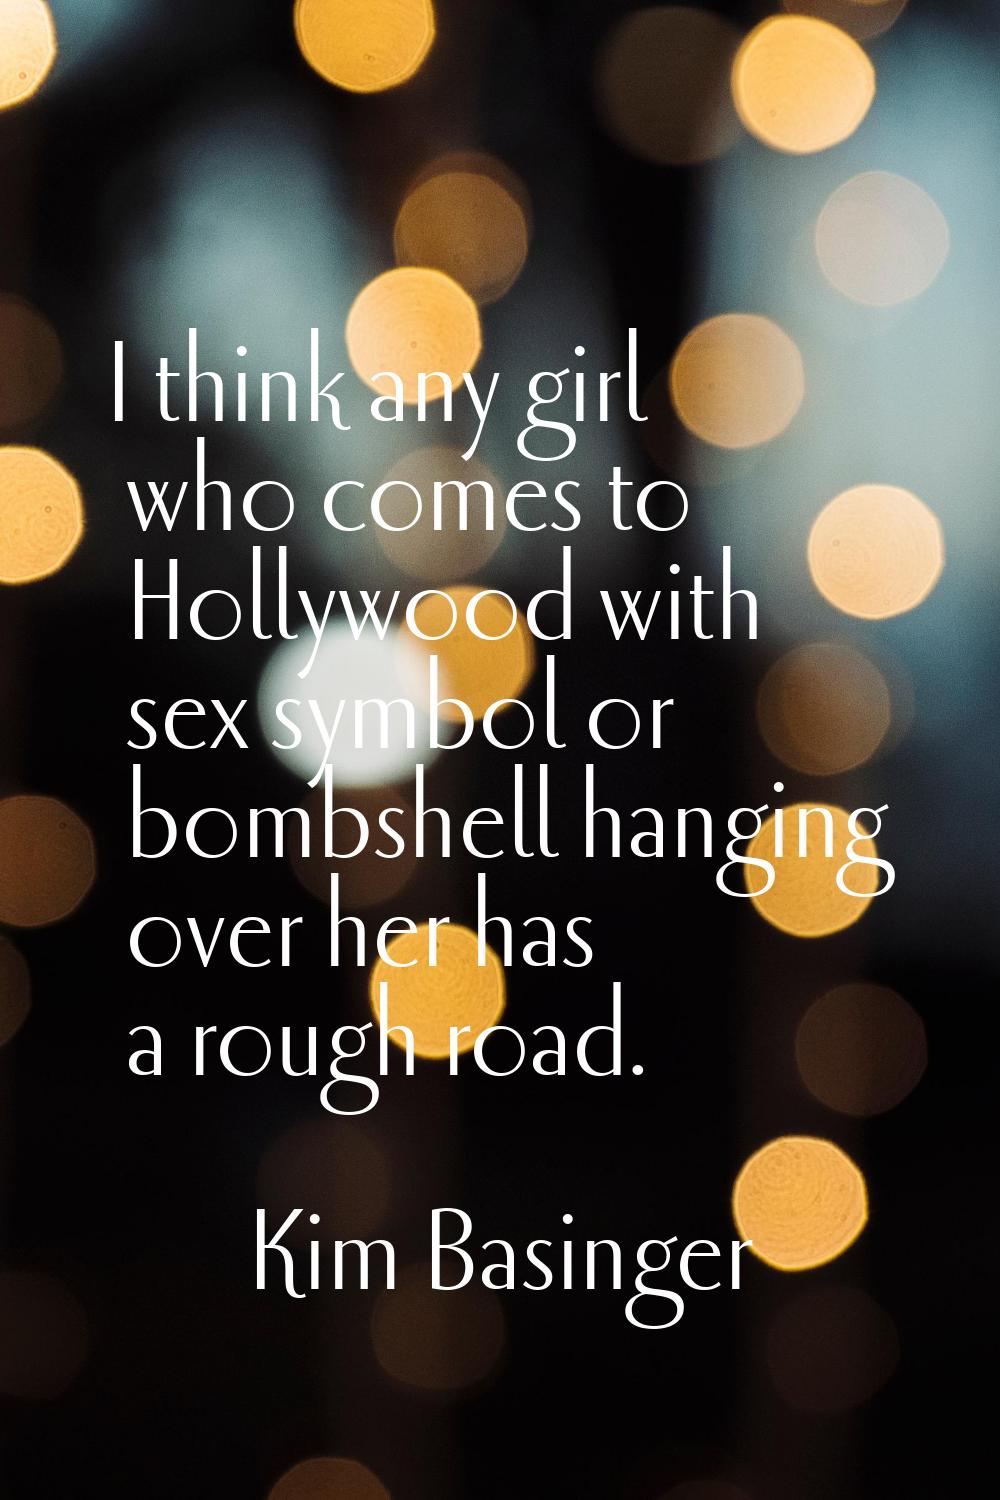 I think any girl who comes to Hollywood with sex symbol or bombshell hanging over her has a rough r